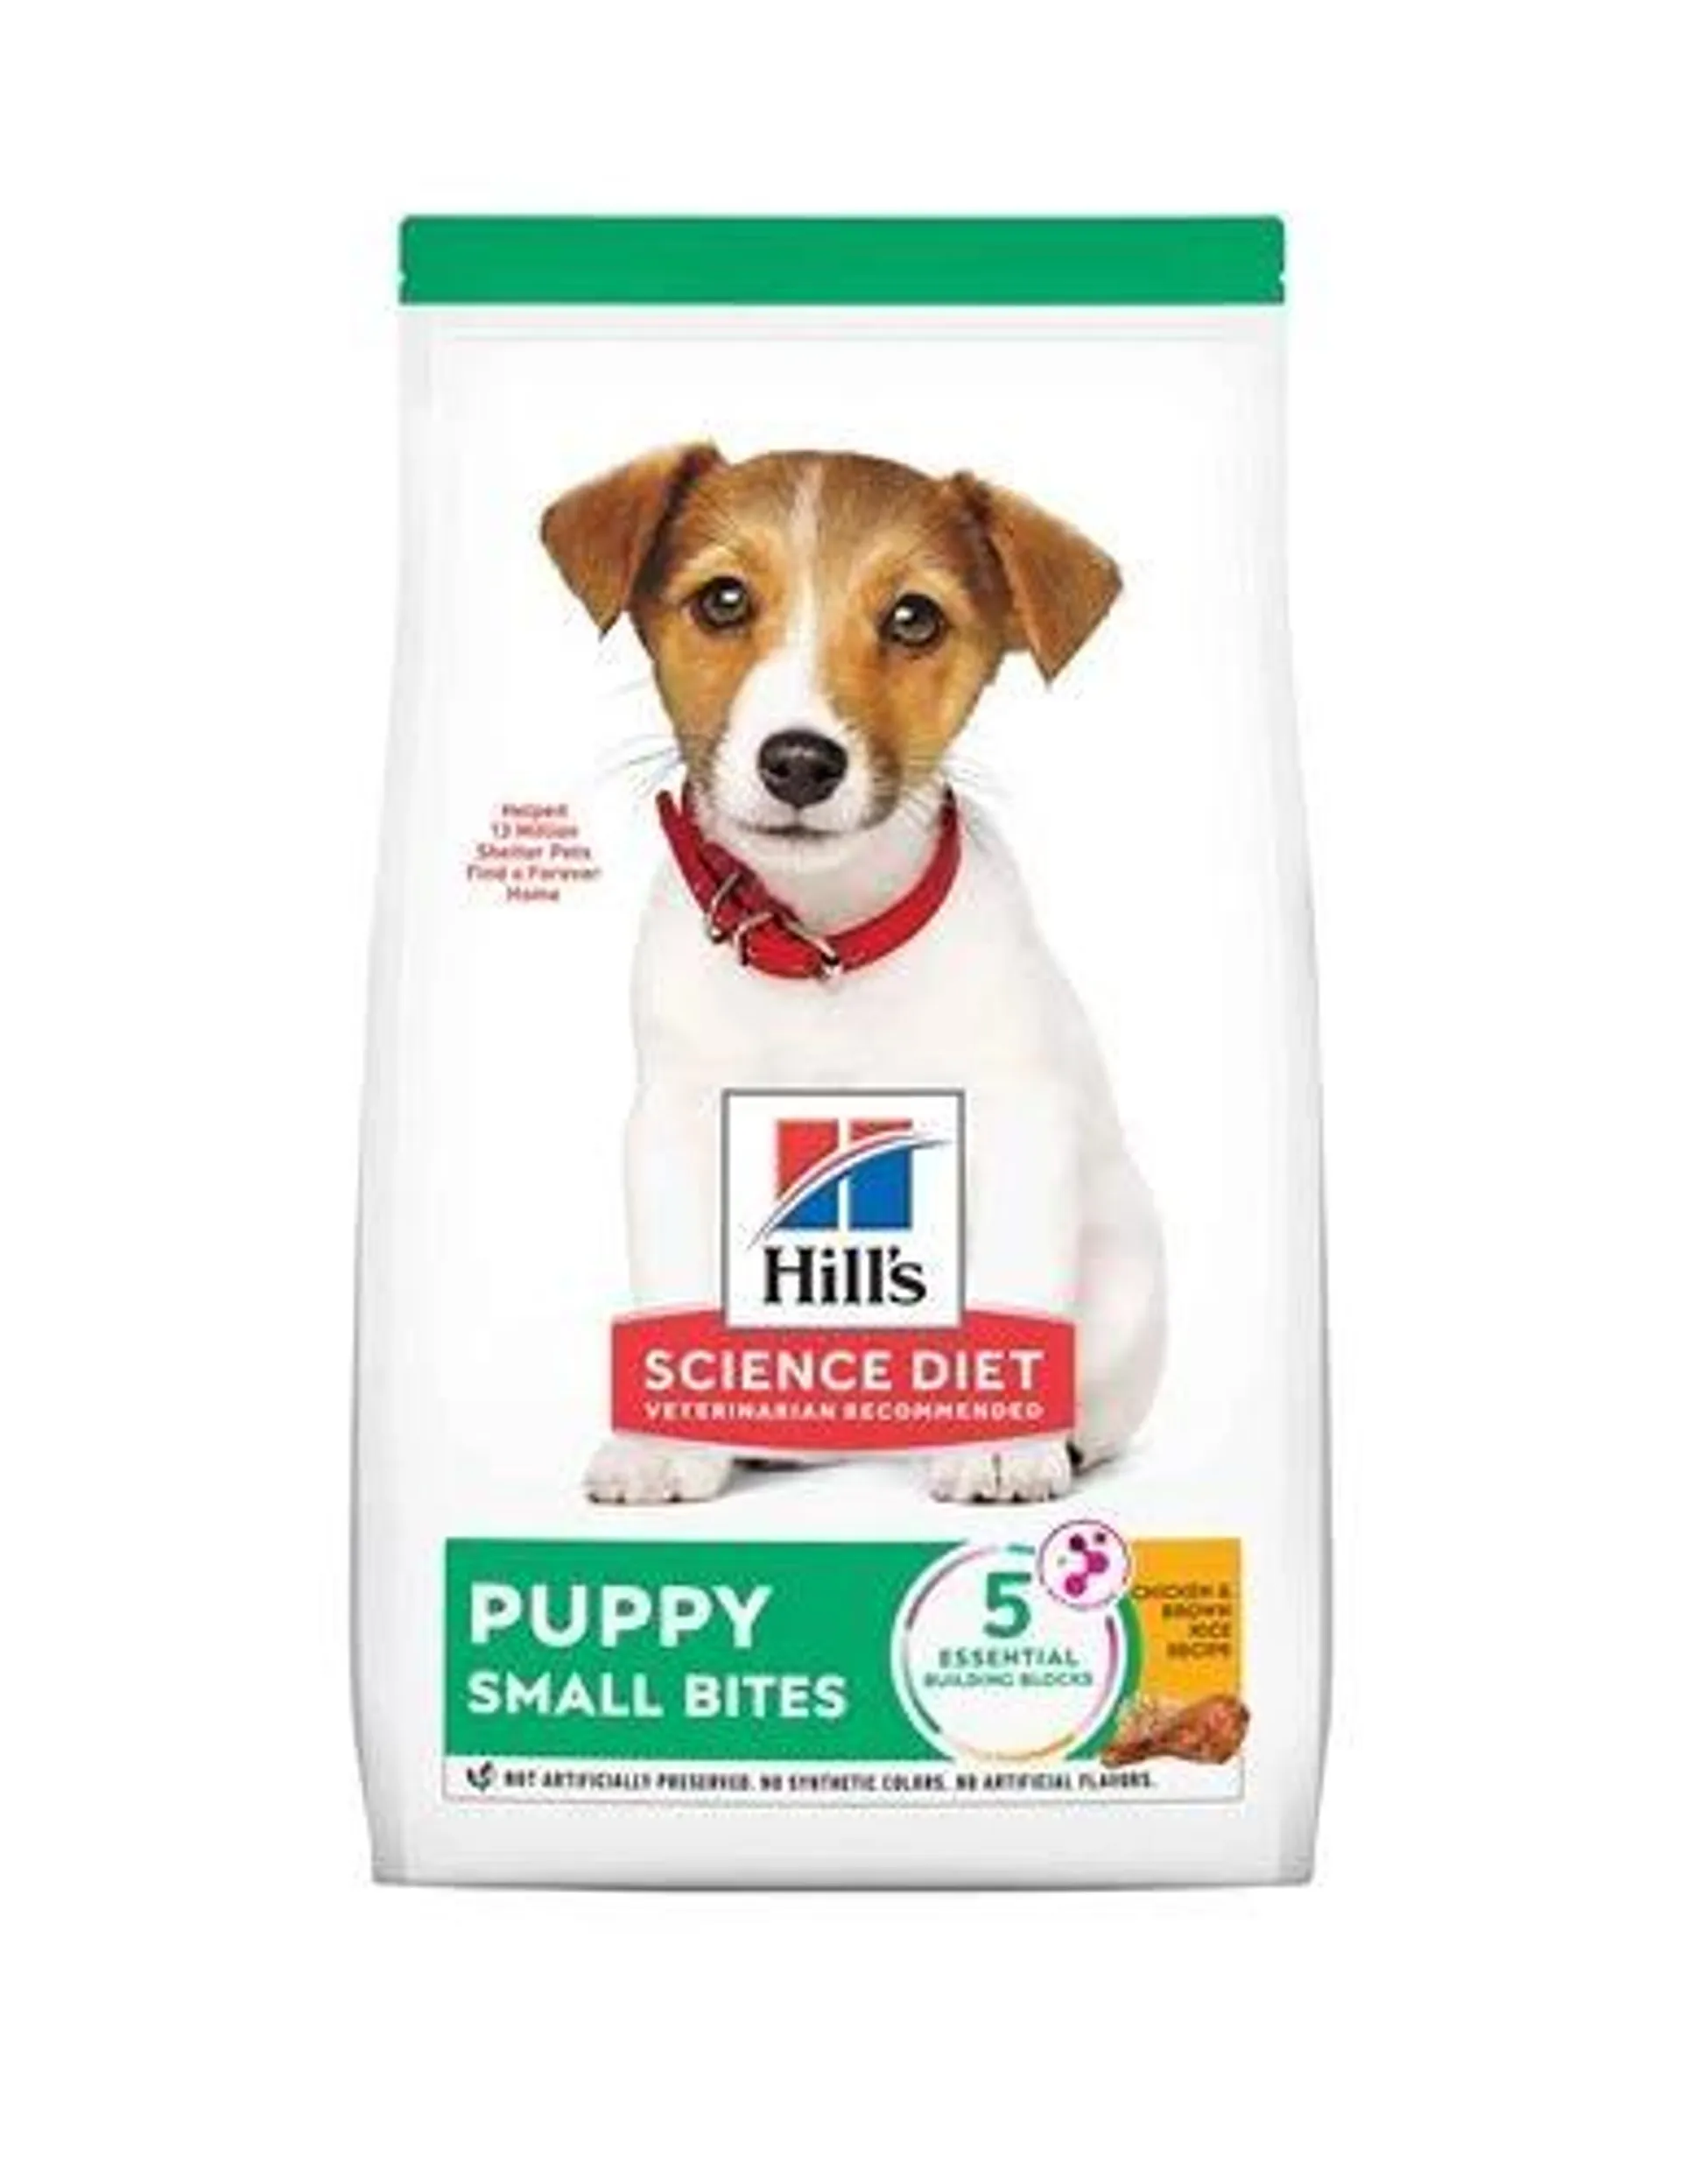 Hill's Science Diet Puppy Healthy Development Small Bites Dry Dog Food, 12.5 Pound Bag